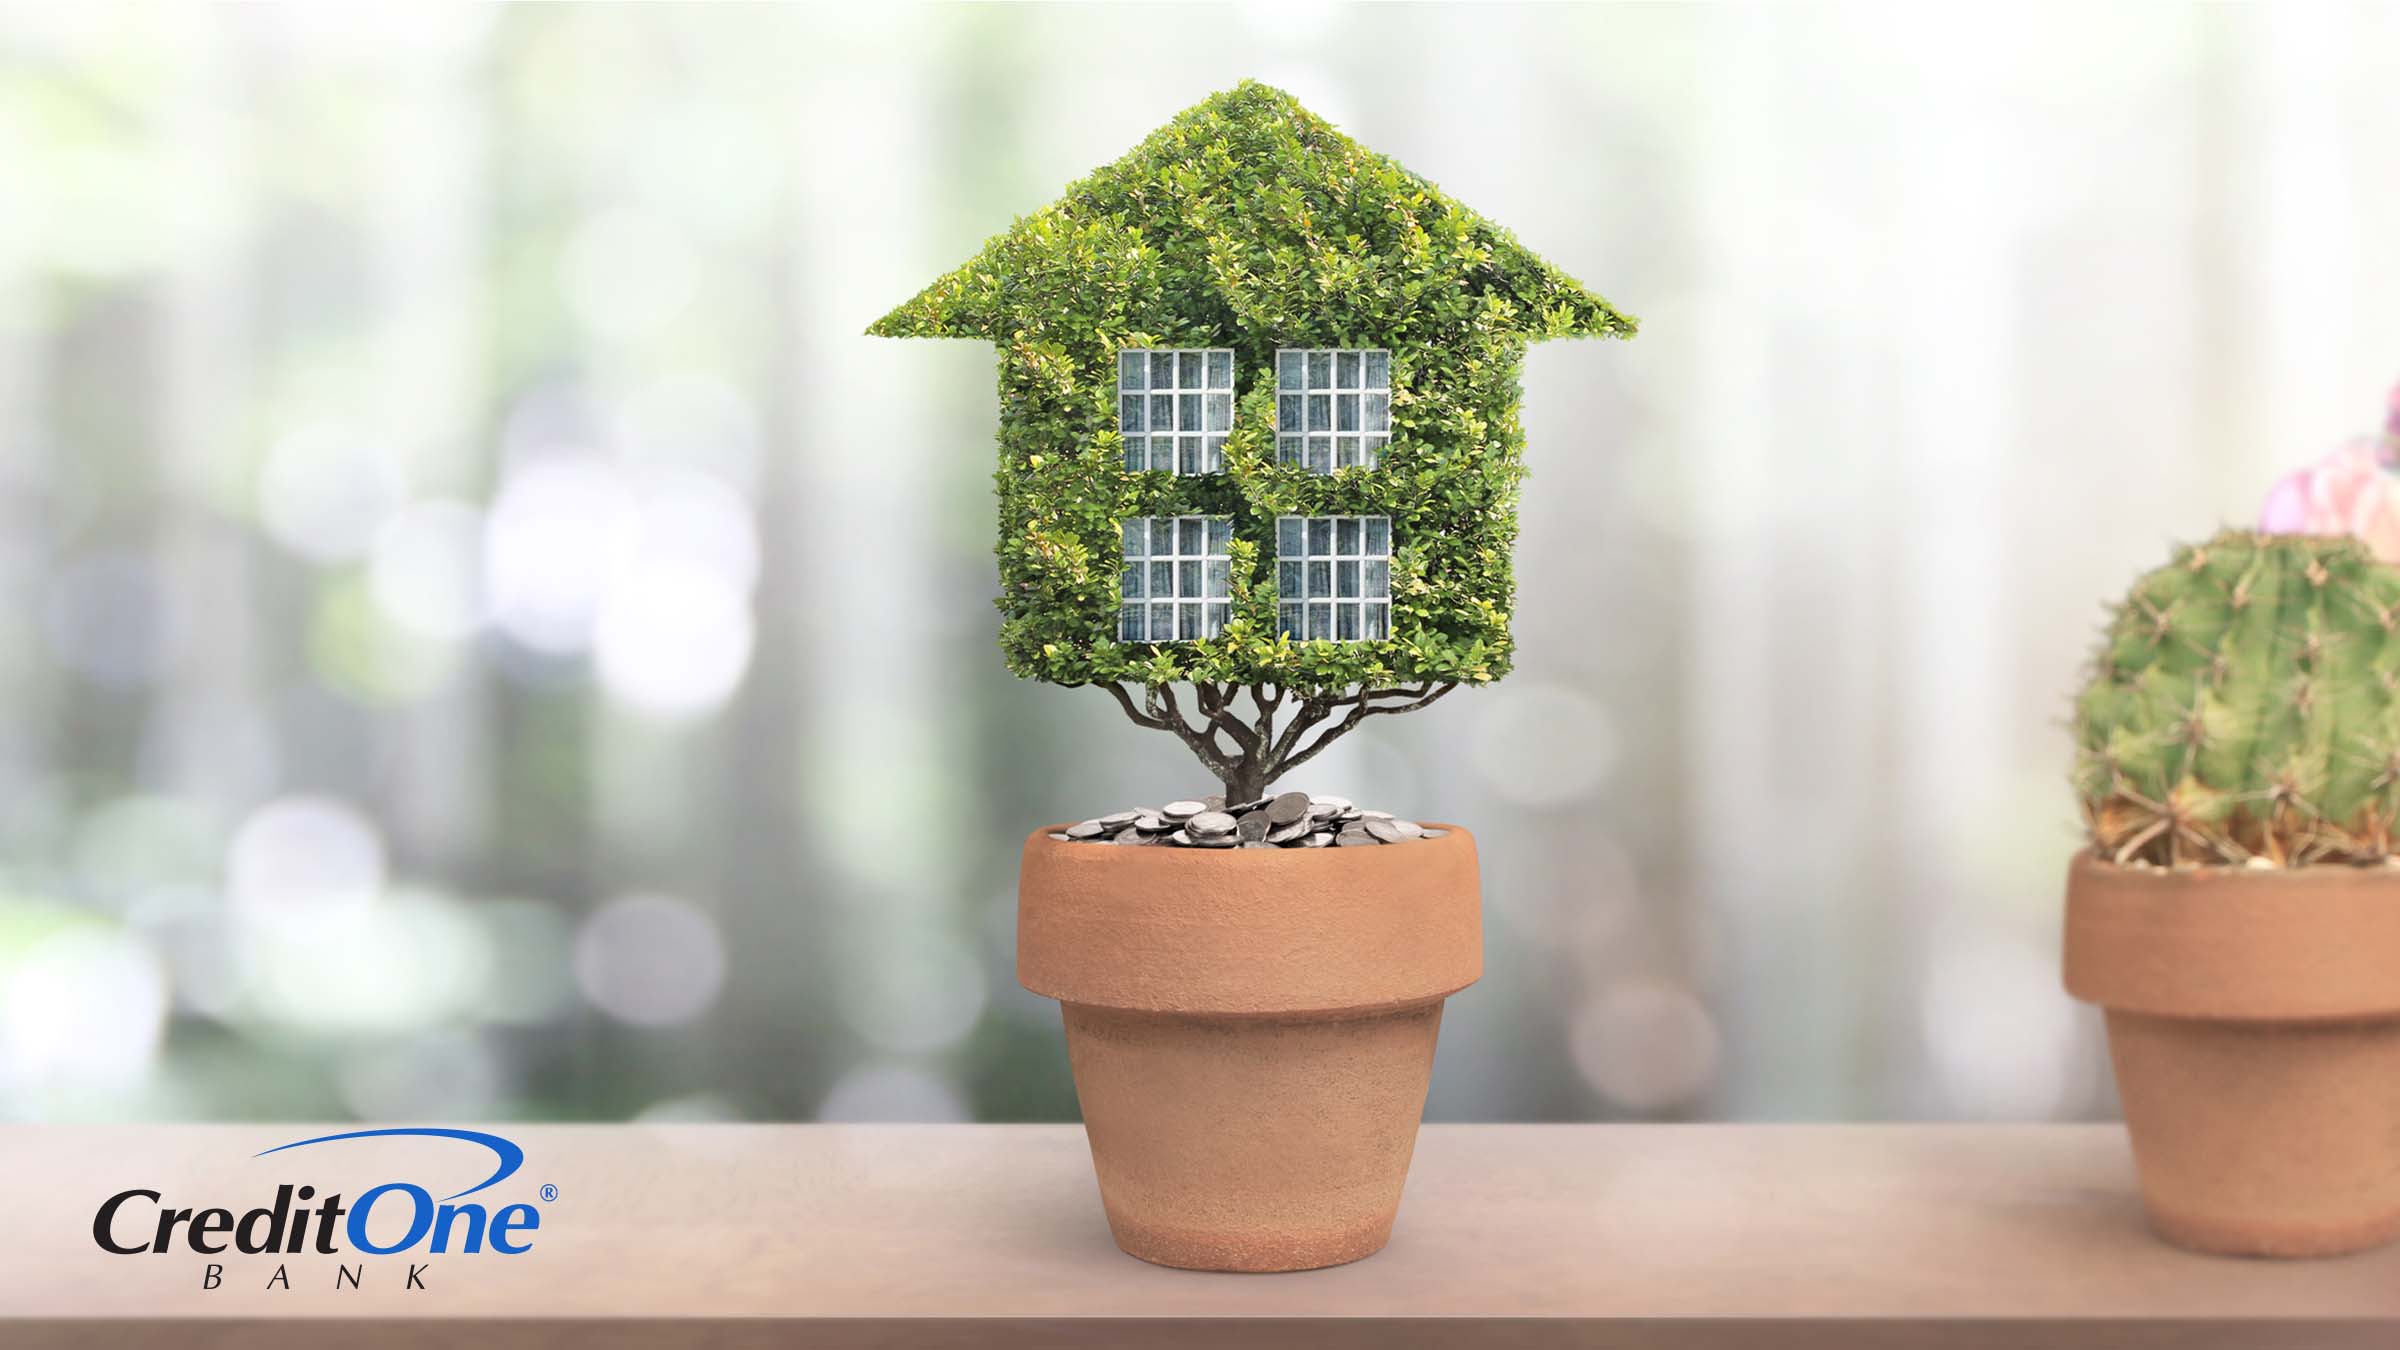 A plant that looks like a house sits inside of a pot filled with coins, signifying paying for an eco-friendly home.